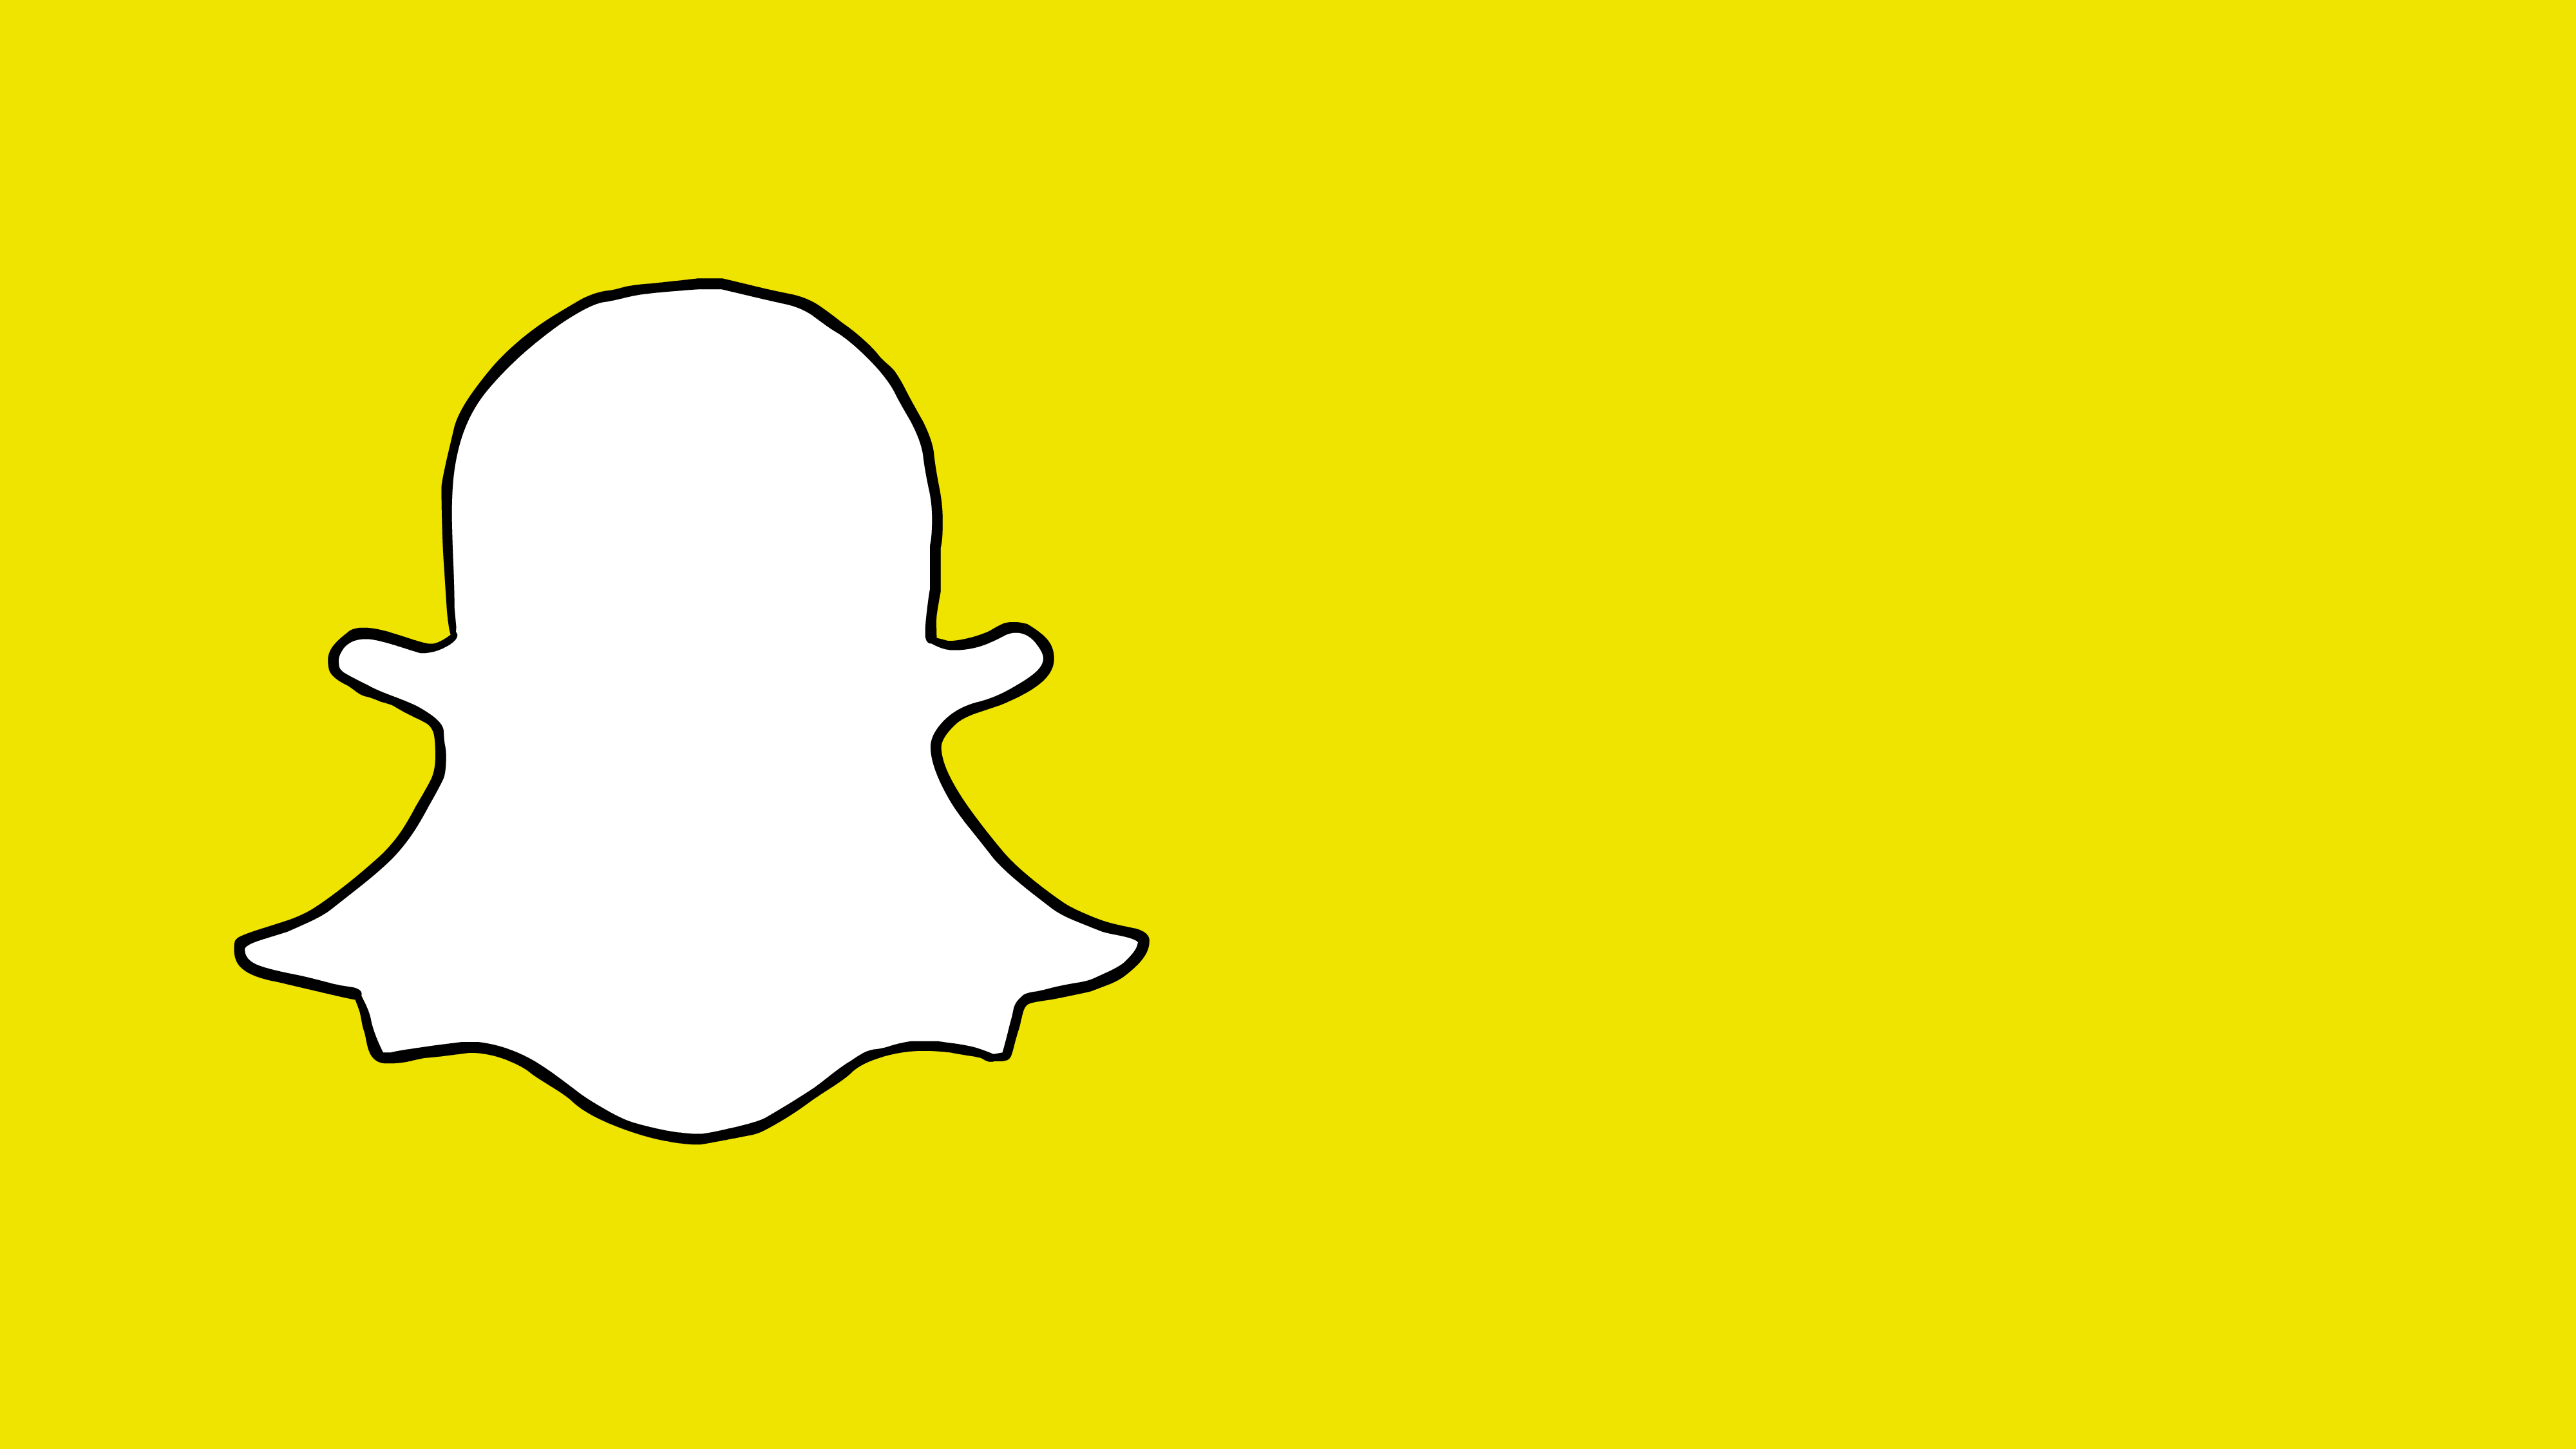 Snapchat chat wallpaper: How to change or customize background